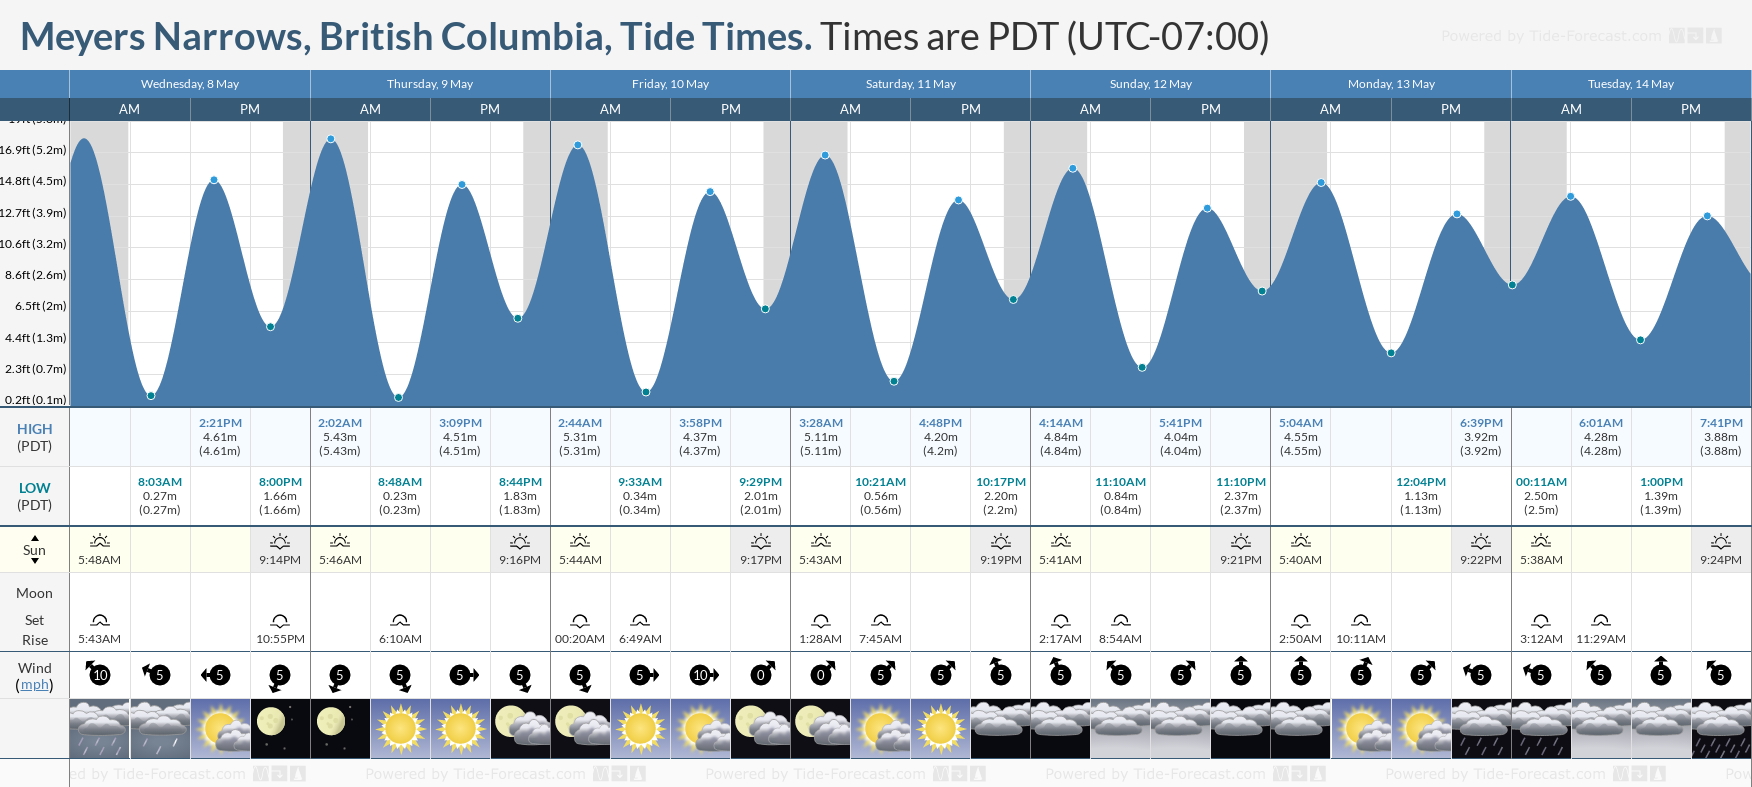 Meyers Narrows, British Columbia Tide Chart including high and low tide tide times for the next 7 days